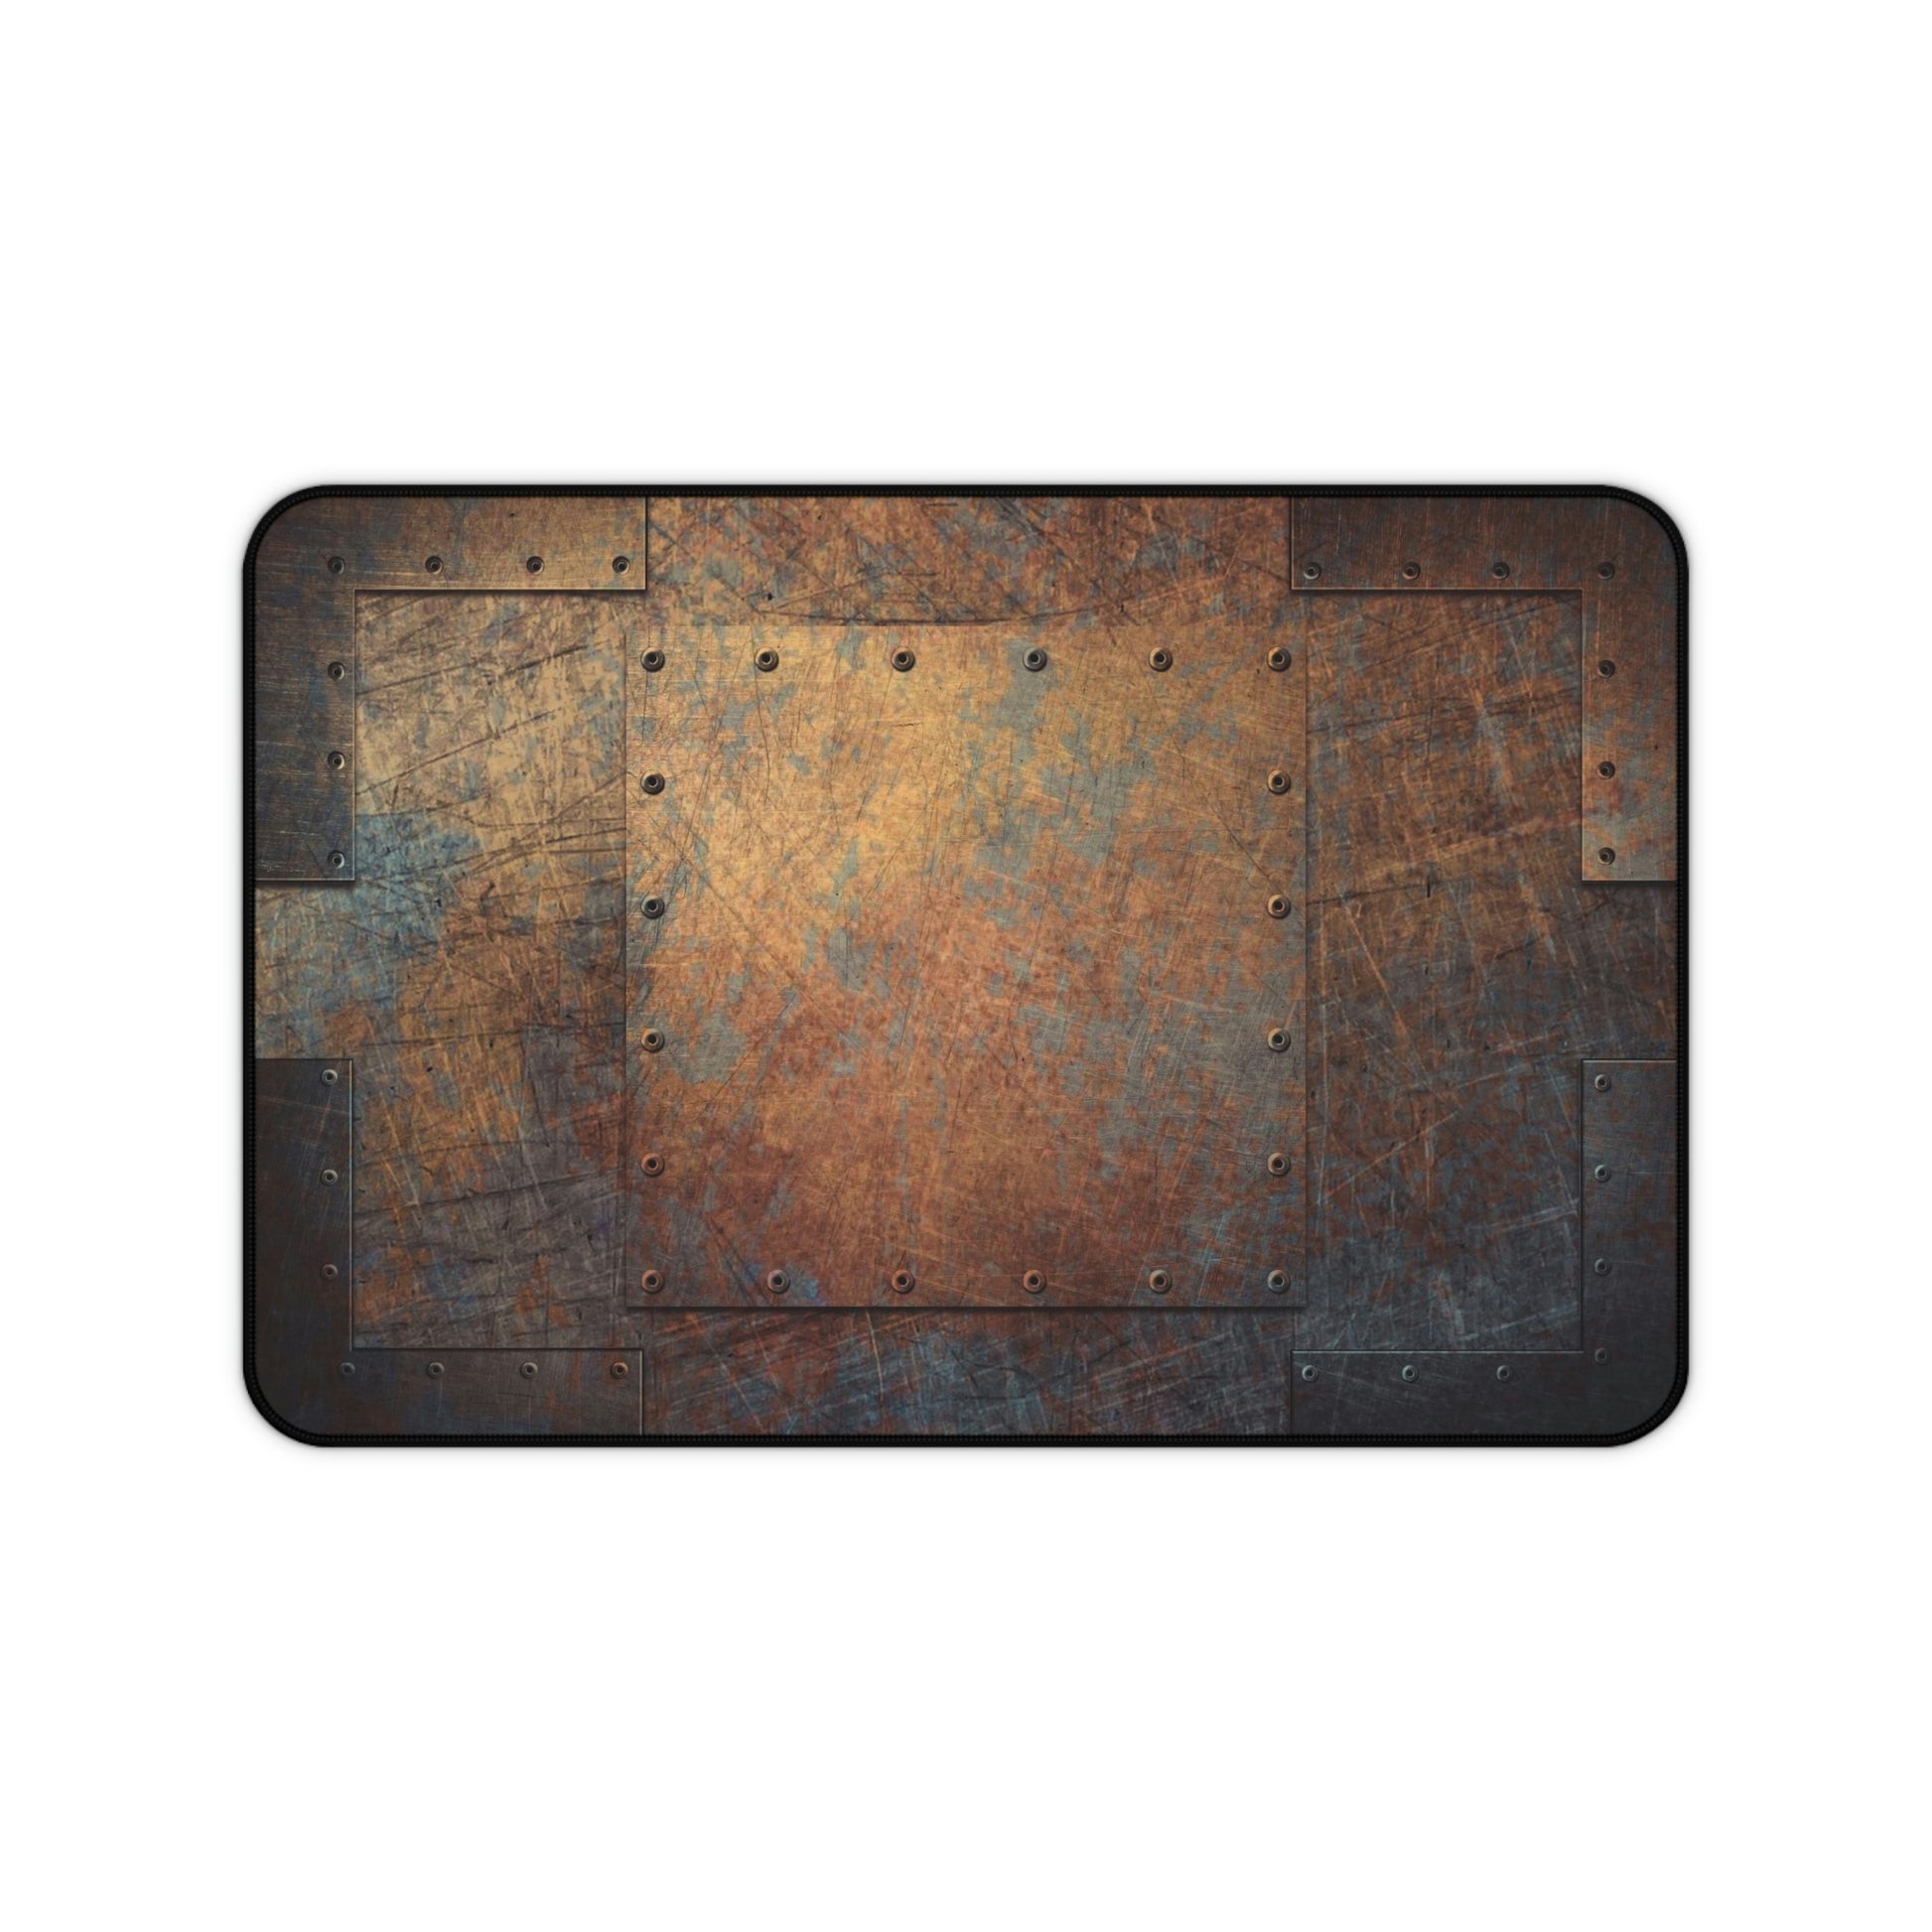 Steampunk Themed Desk Accessories - Patinated, Weather Beaten, Riveted Copper Sheets Print on Neoprene Desk Mat 12 x 18